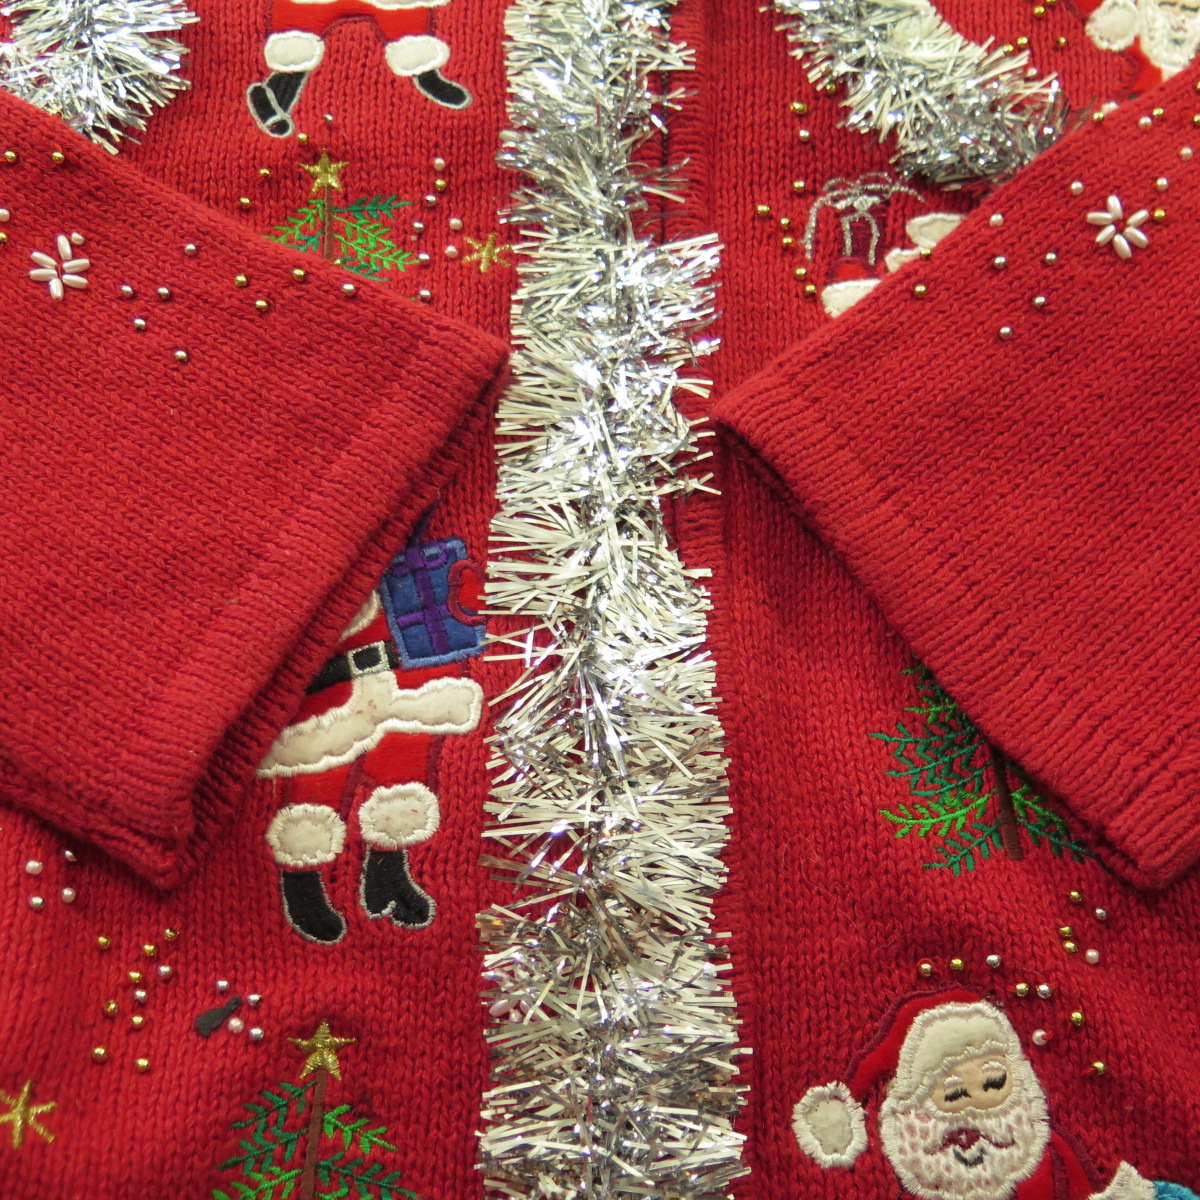 Ugly Santa Clause Christmas Cardigan Sweater Unisex 1X or Large Garland ...